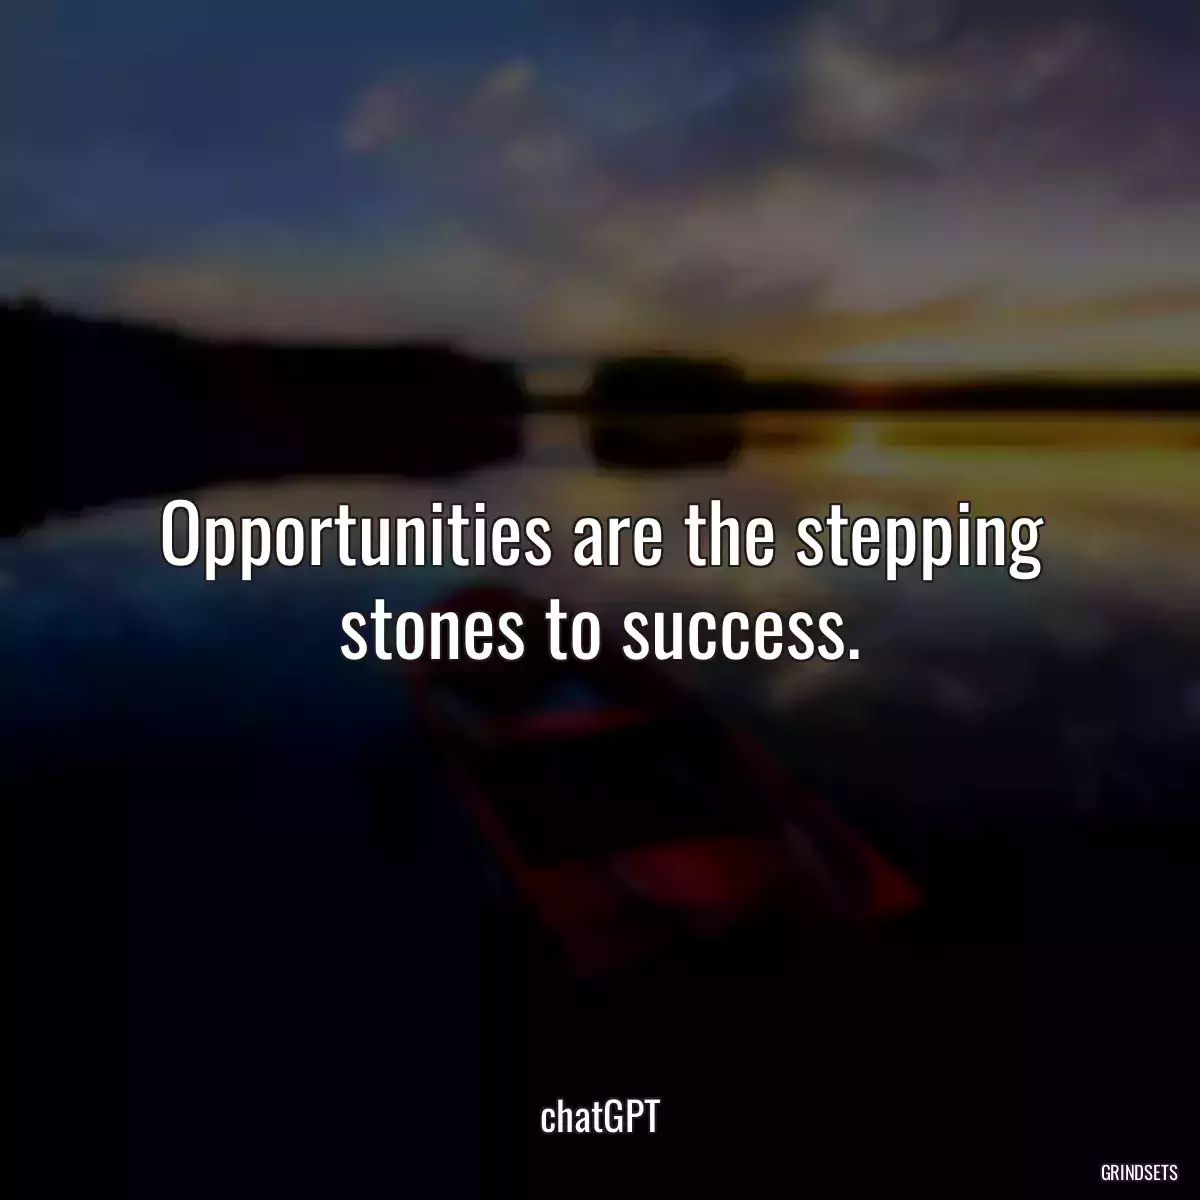 Opportunities are the stepping stones to success.